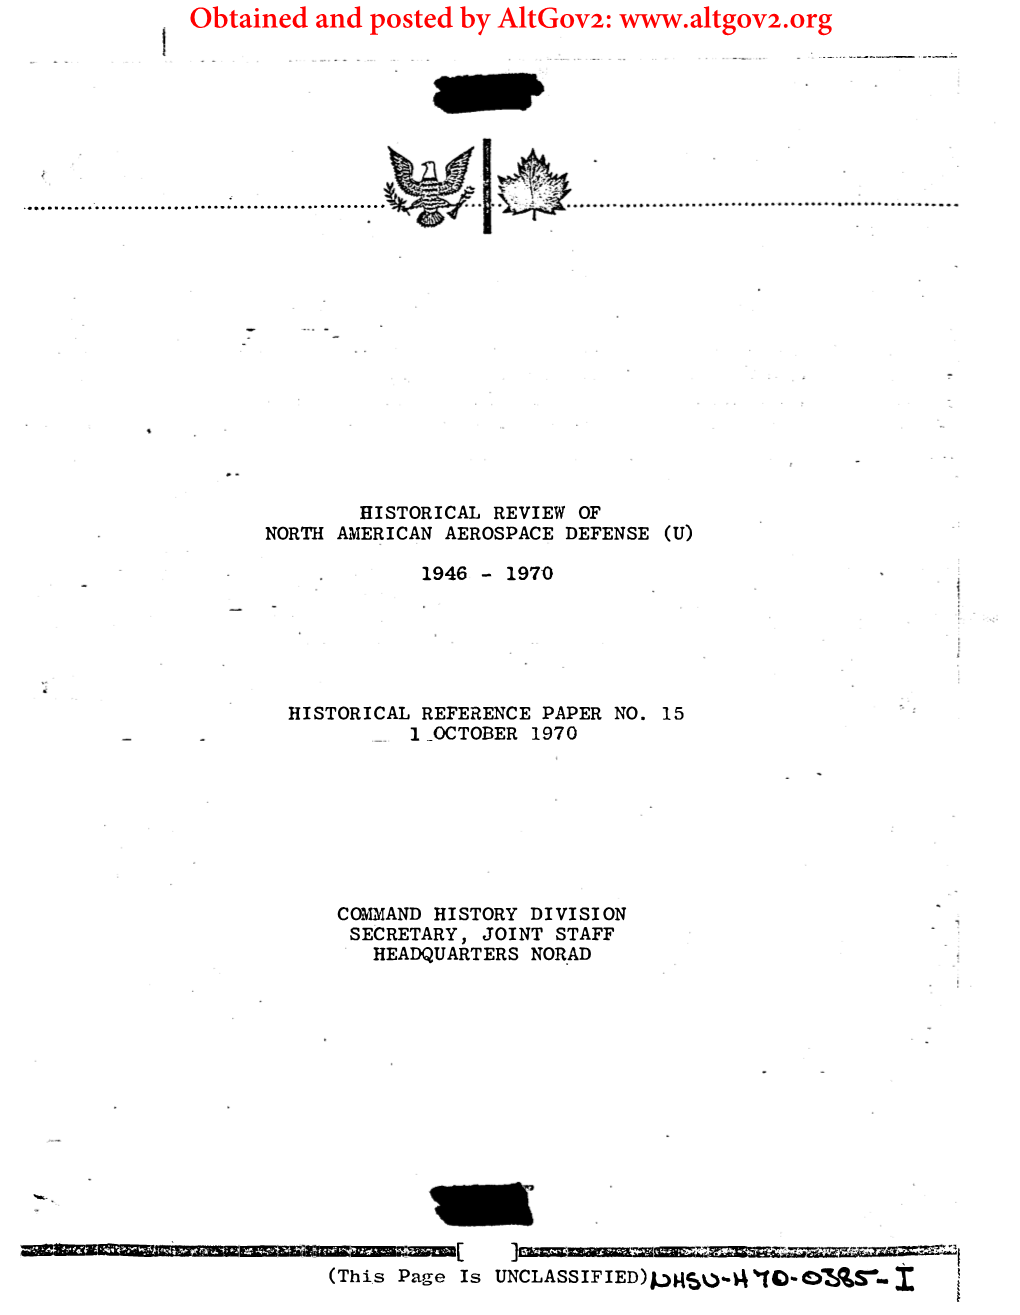 Historical Review of North American Aerospace Defense 1946